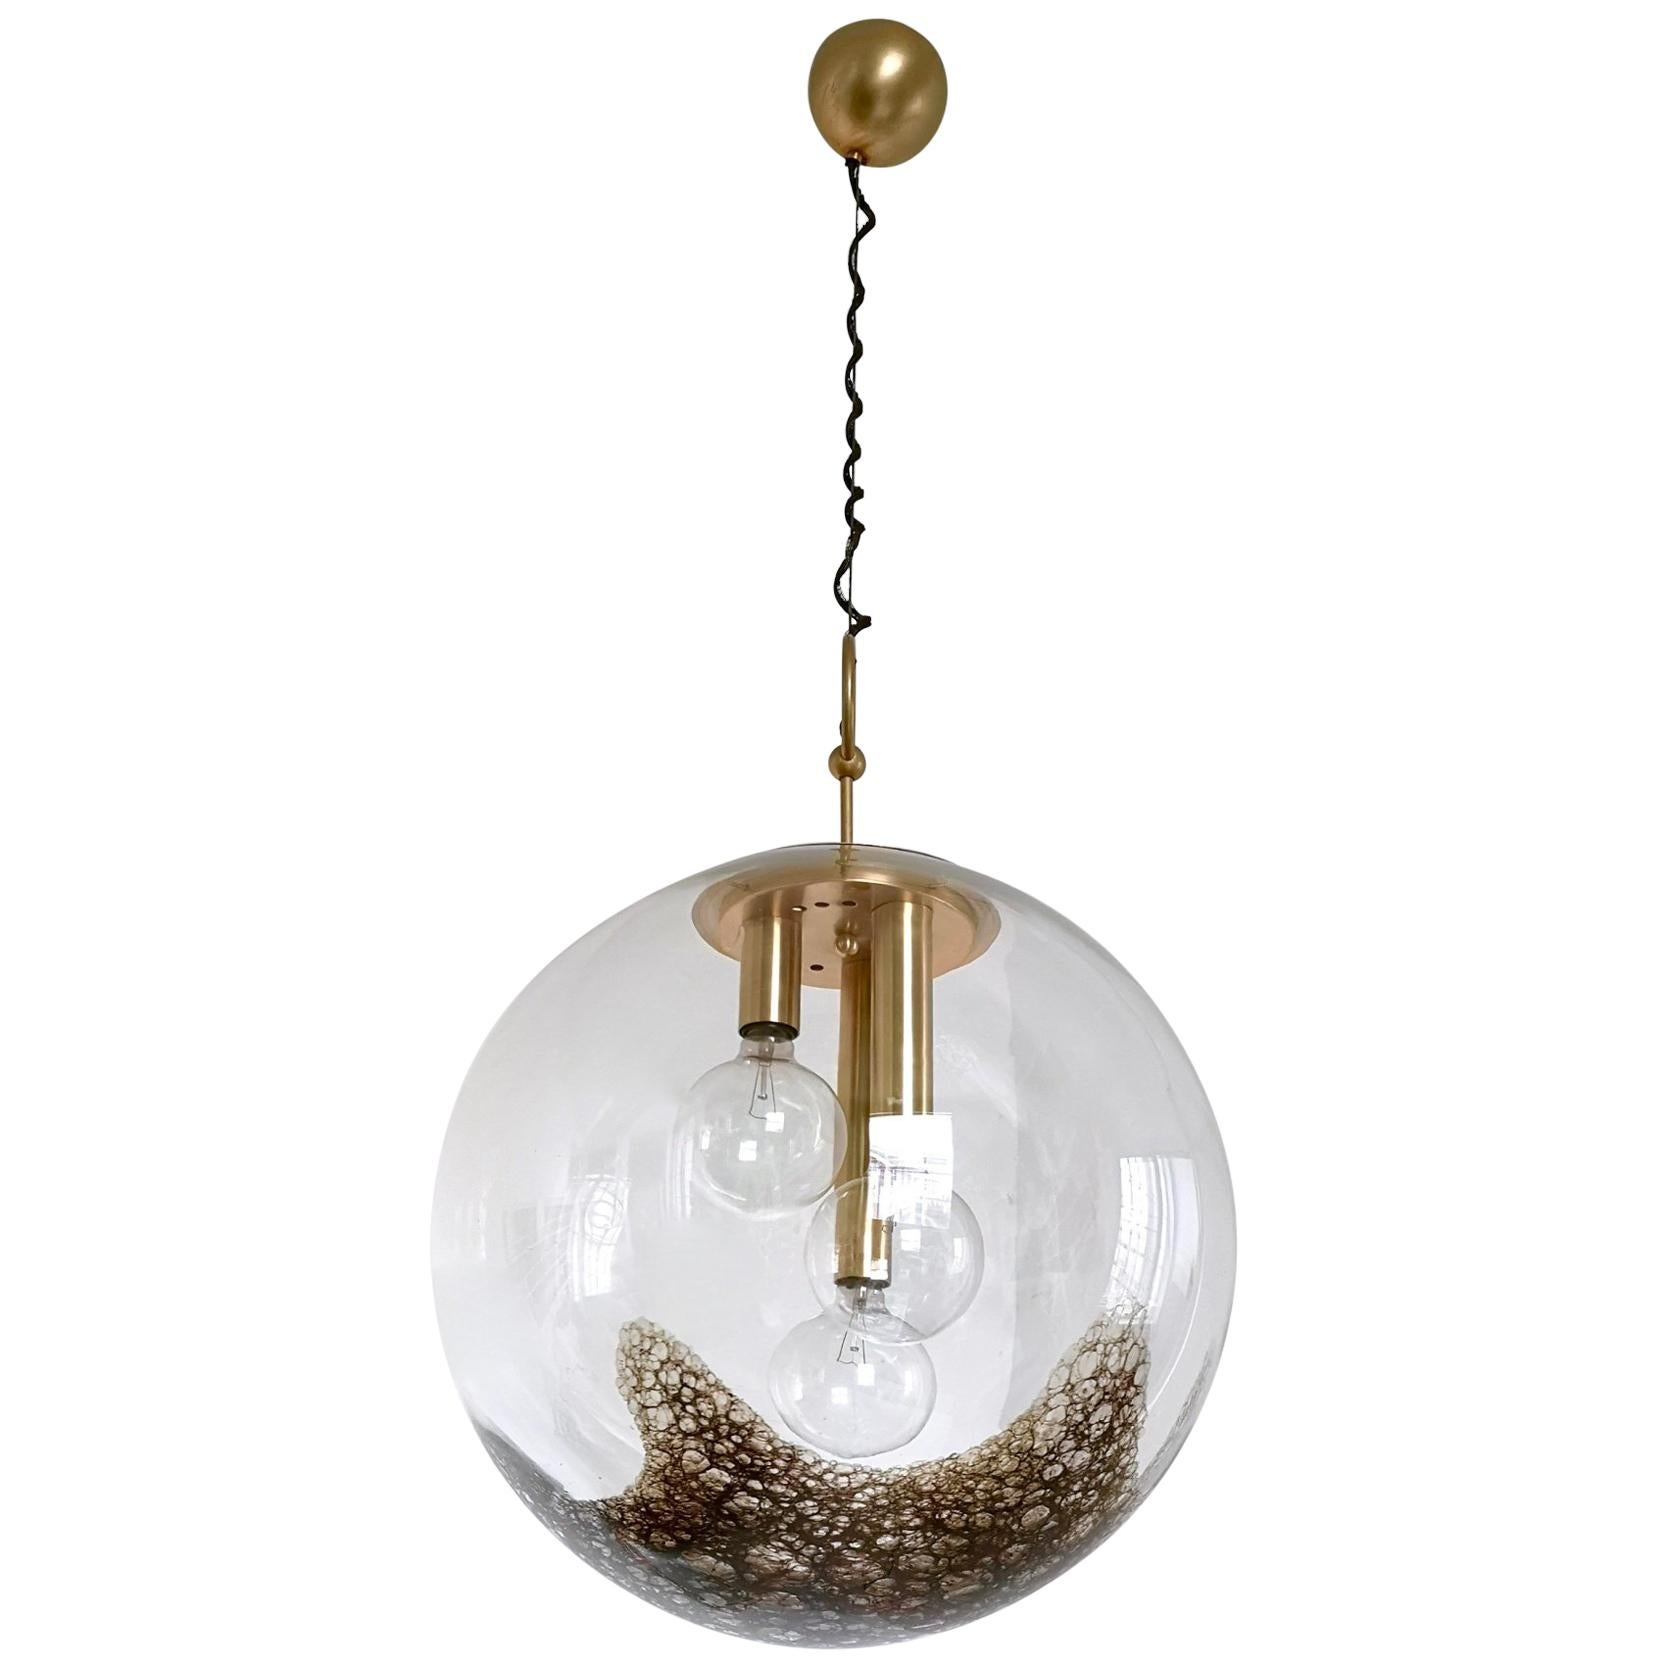 Postmodern Large Globe Blown Glass Pendant by Murrina with Pulegoso Parts, Italy